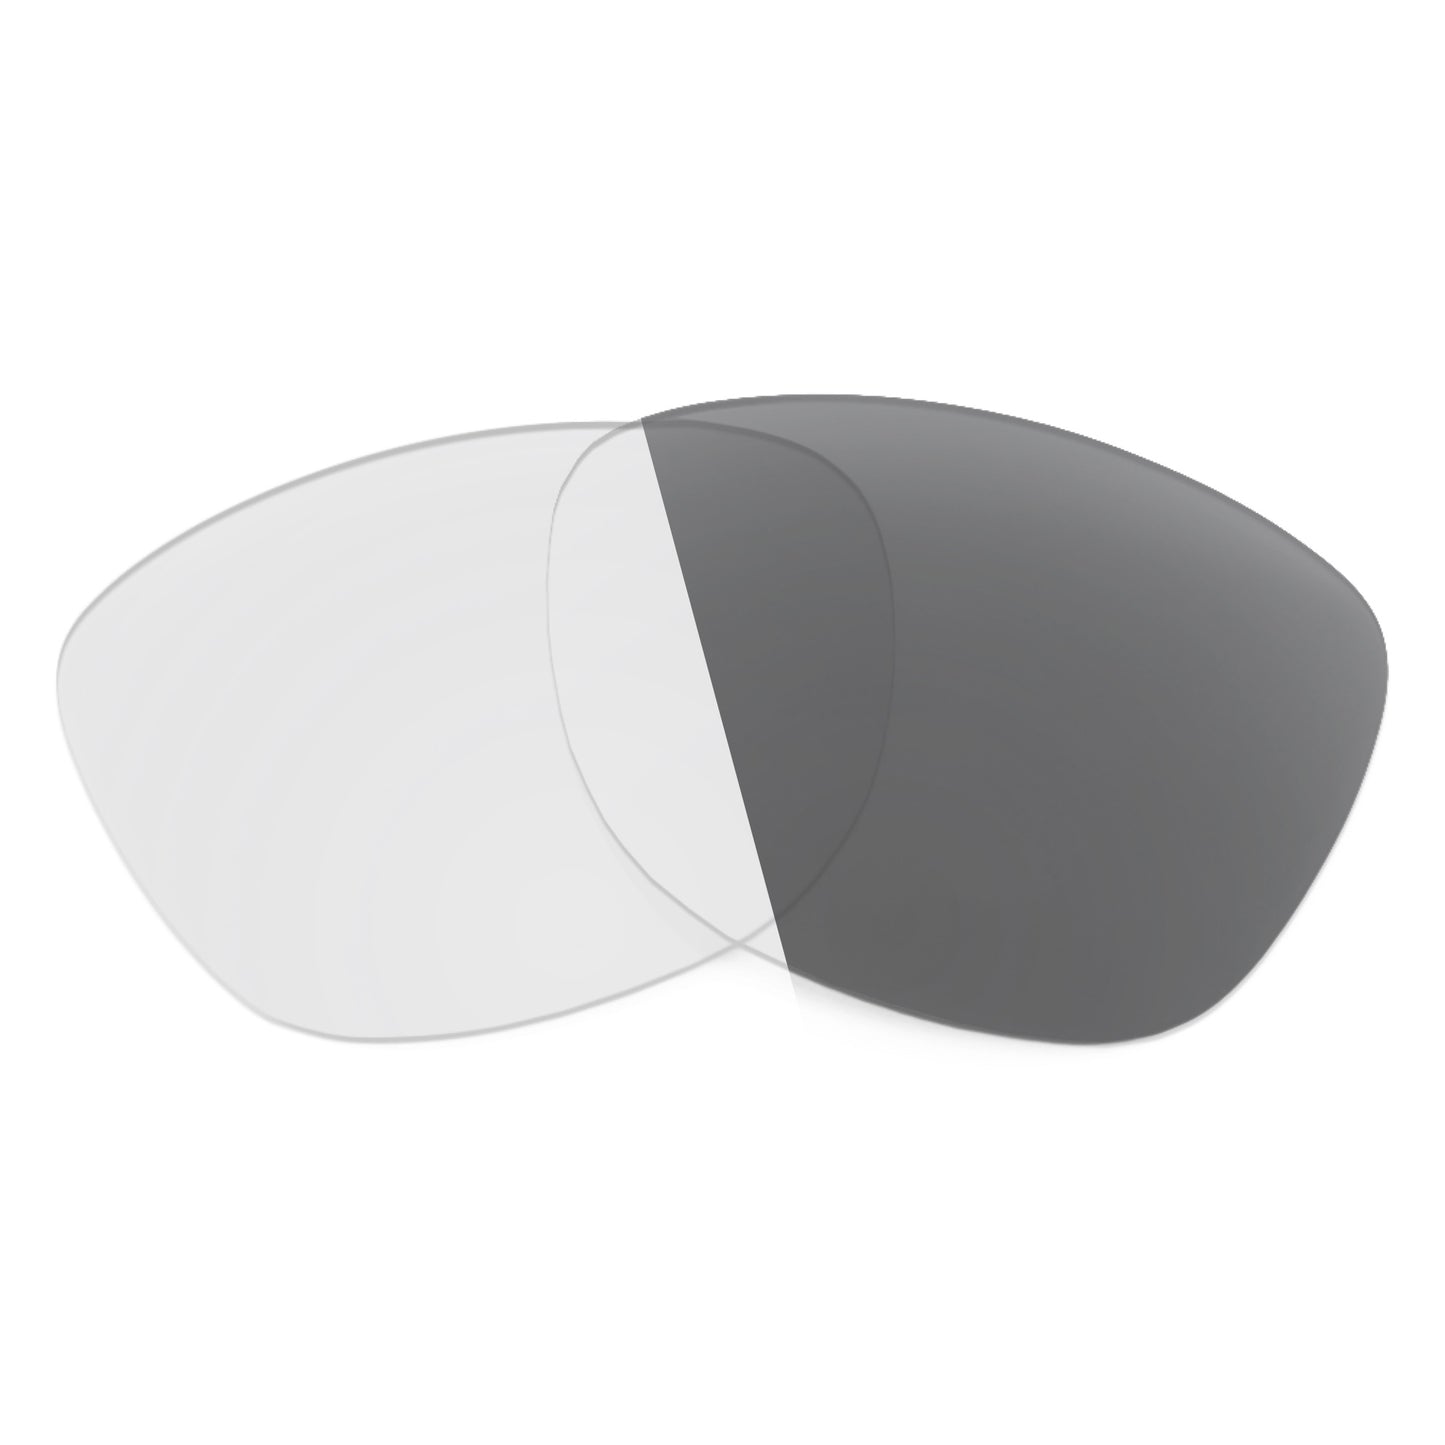 Revant replacement lenses for Ray-Ban Steve RB4487 54mm Non-Polarized Adapt Gray Photochromic